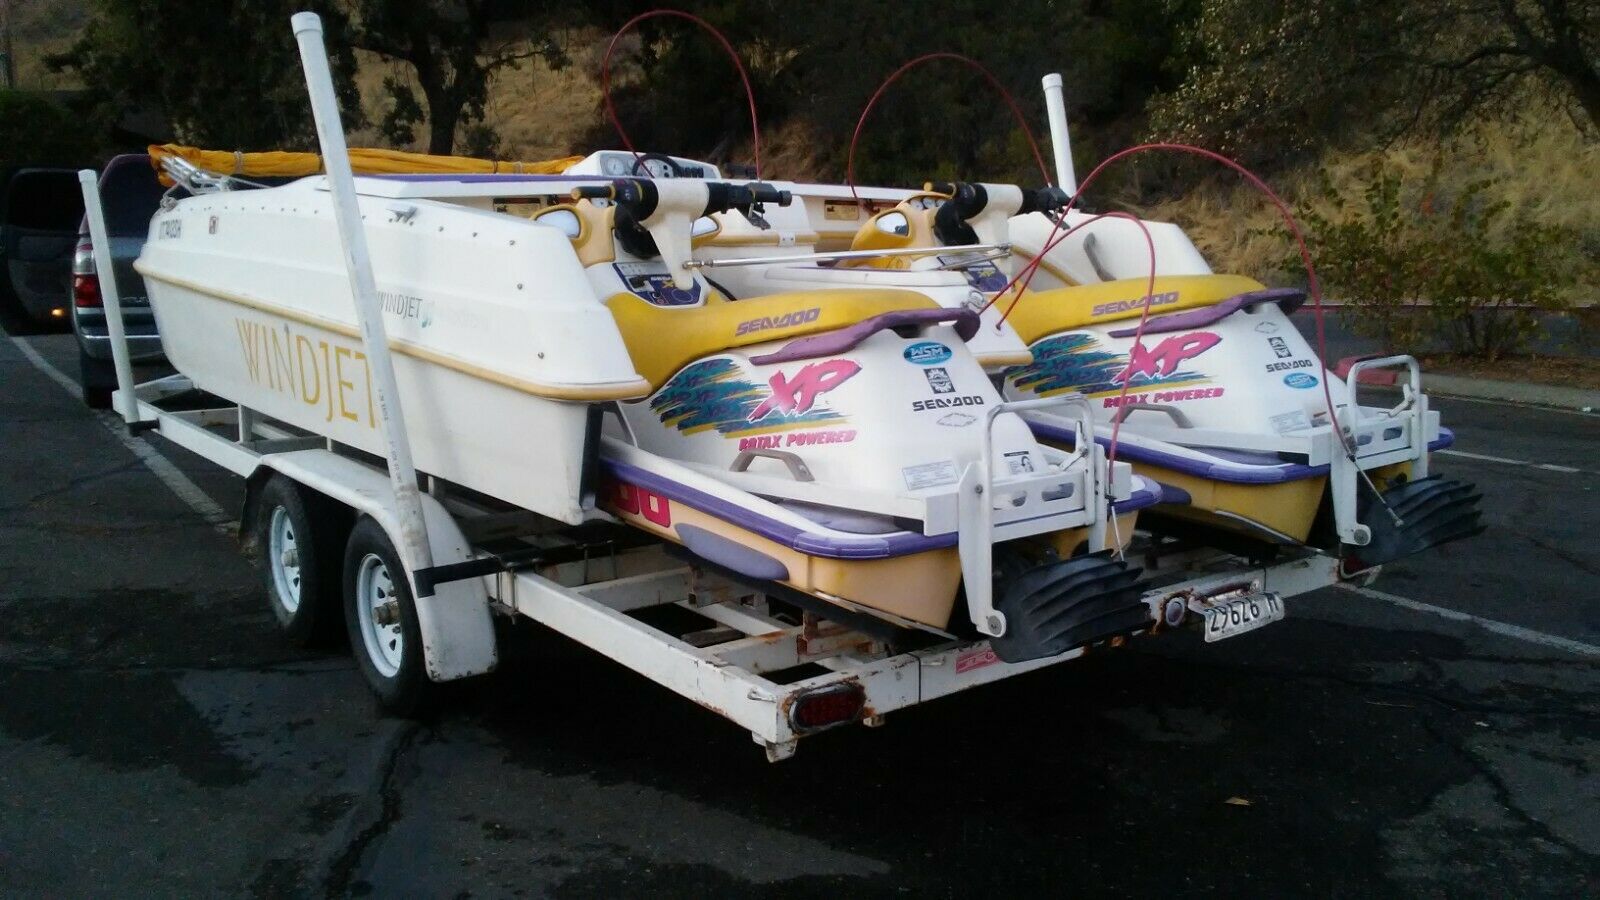 WINDJET Jet Boat 1996 for sale for $18,000 - Boats-from ...